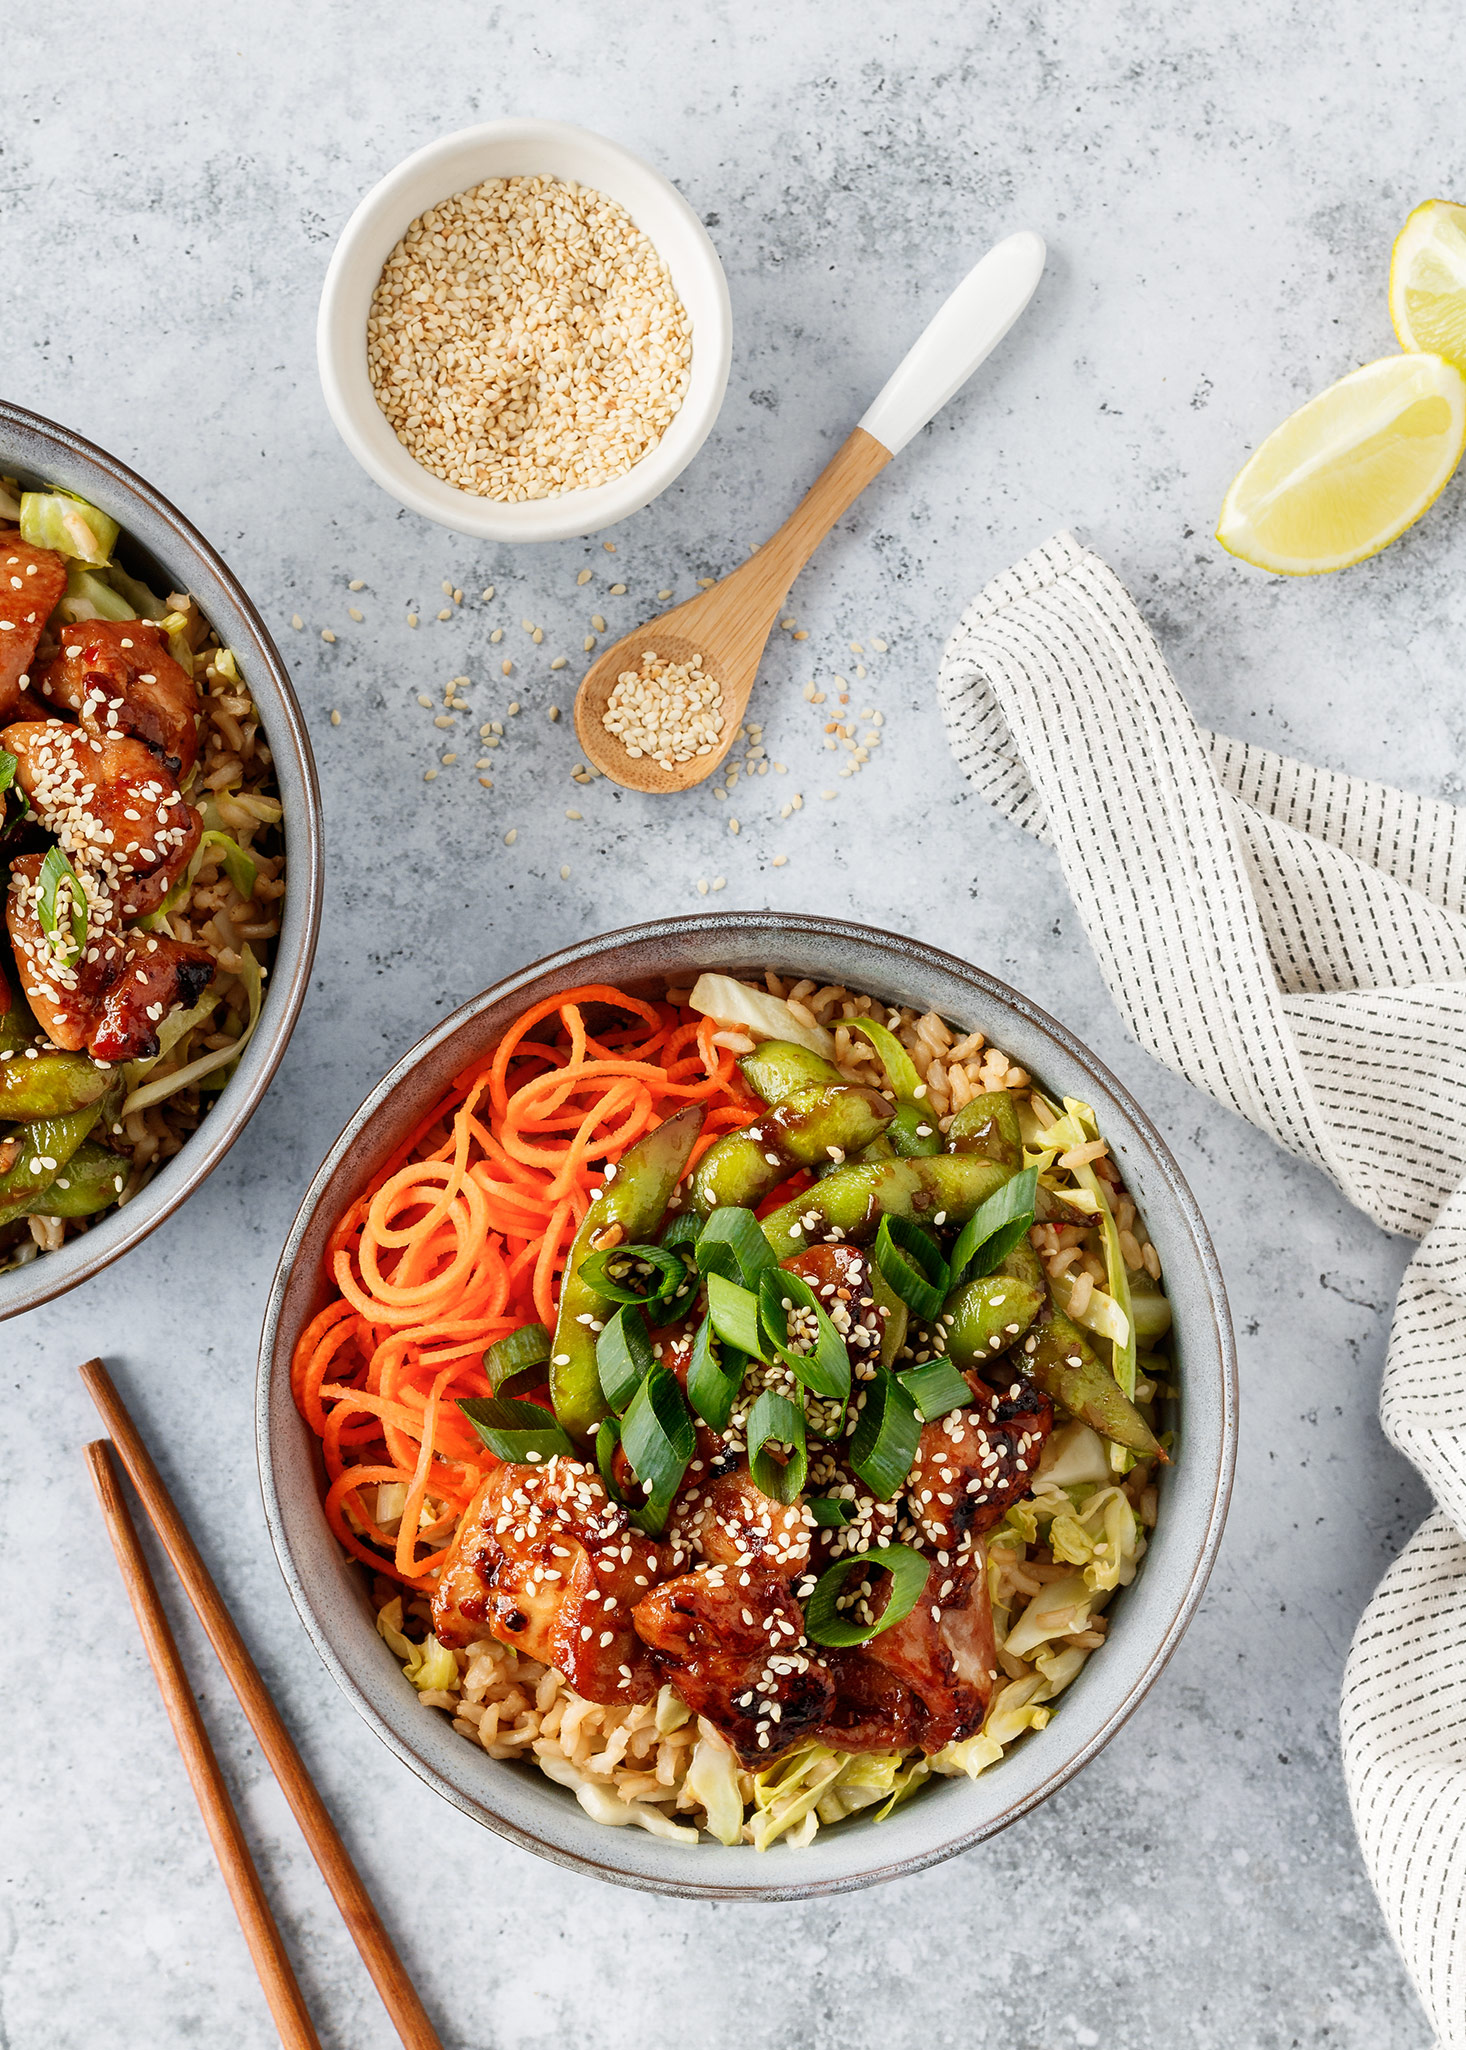 Sweet chilli chicken bowls with sticky edamame beans, rice and cabbage.